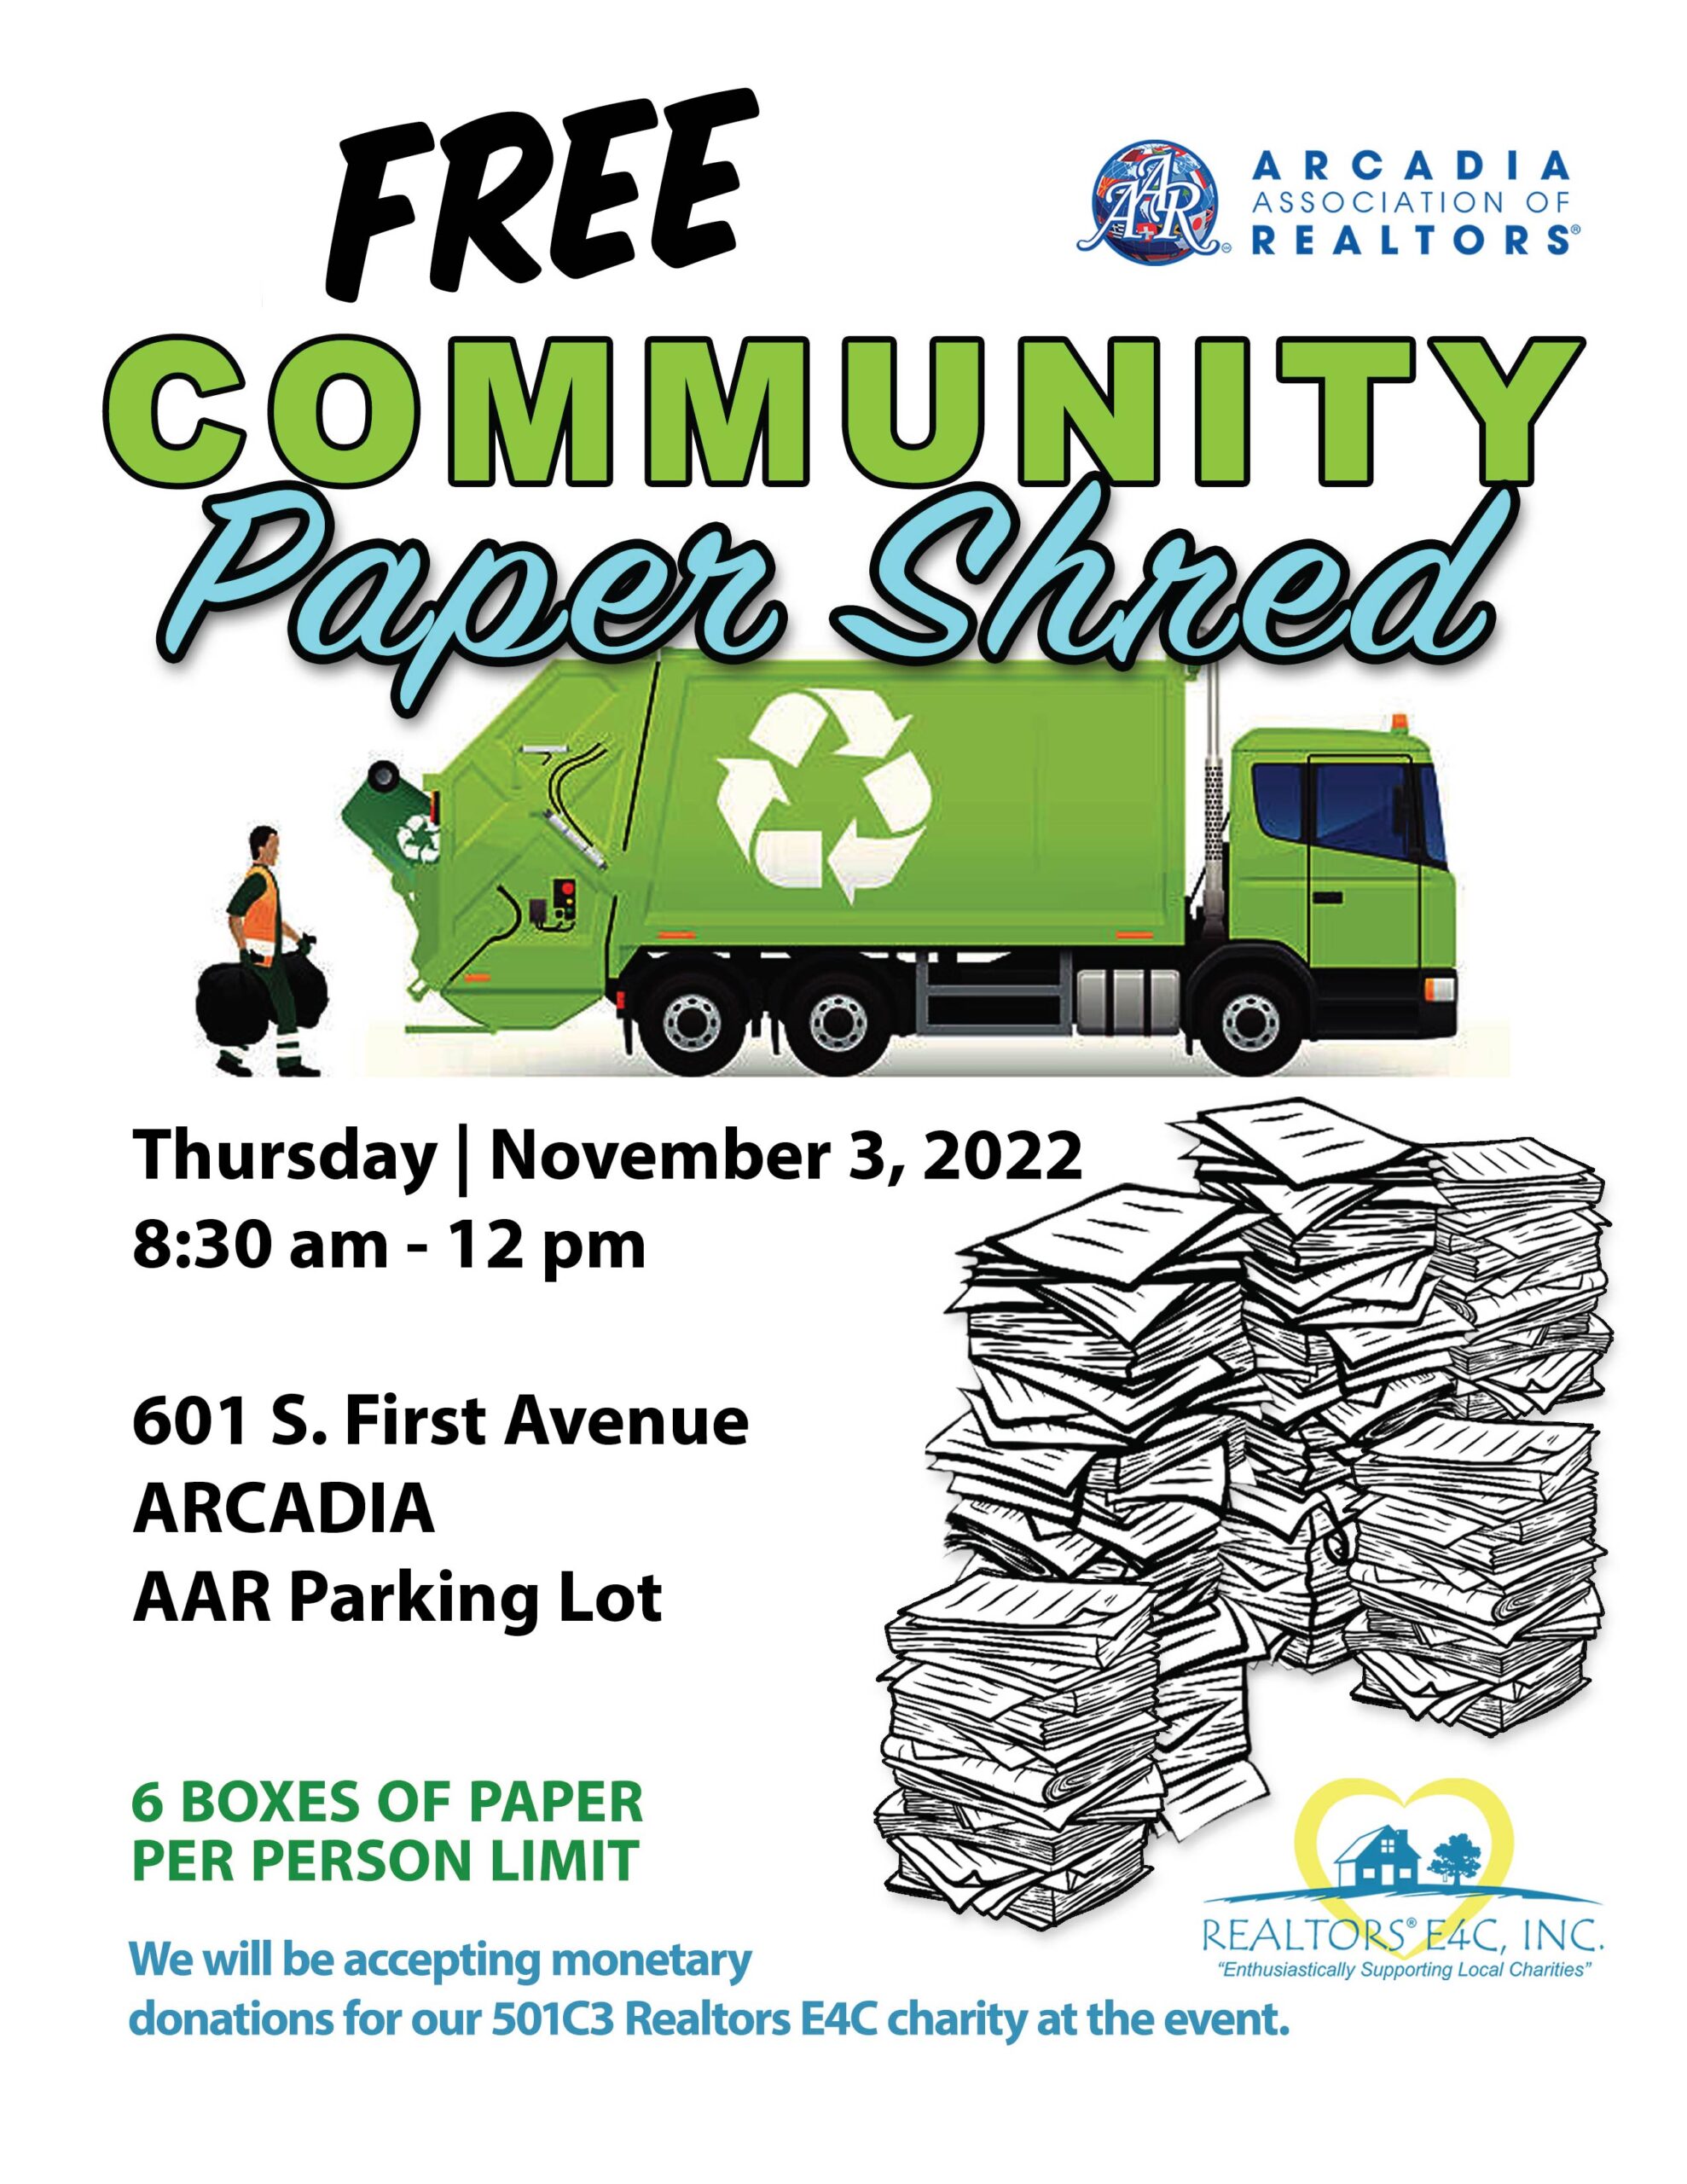 Free Community Paper Shred event from Arcadia Association of Realtors